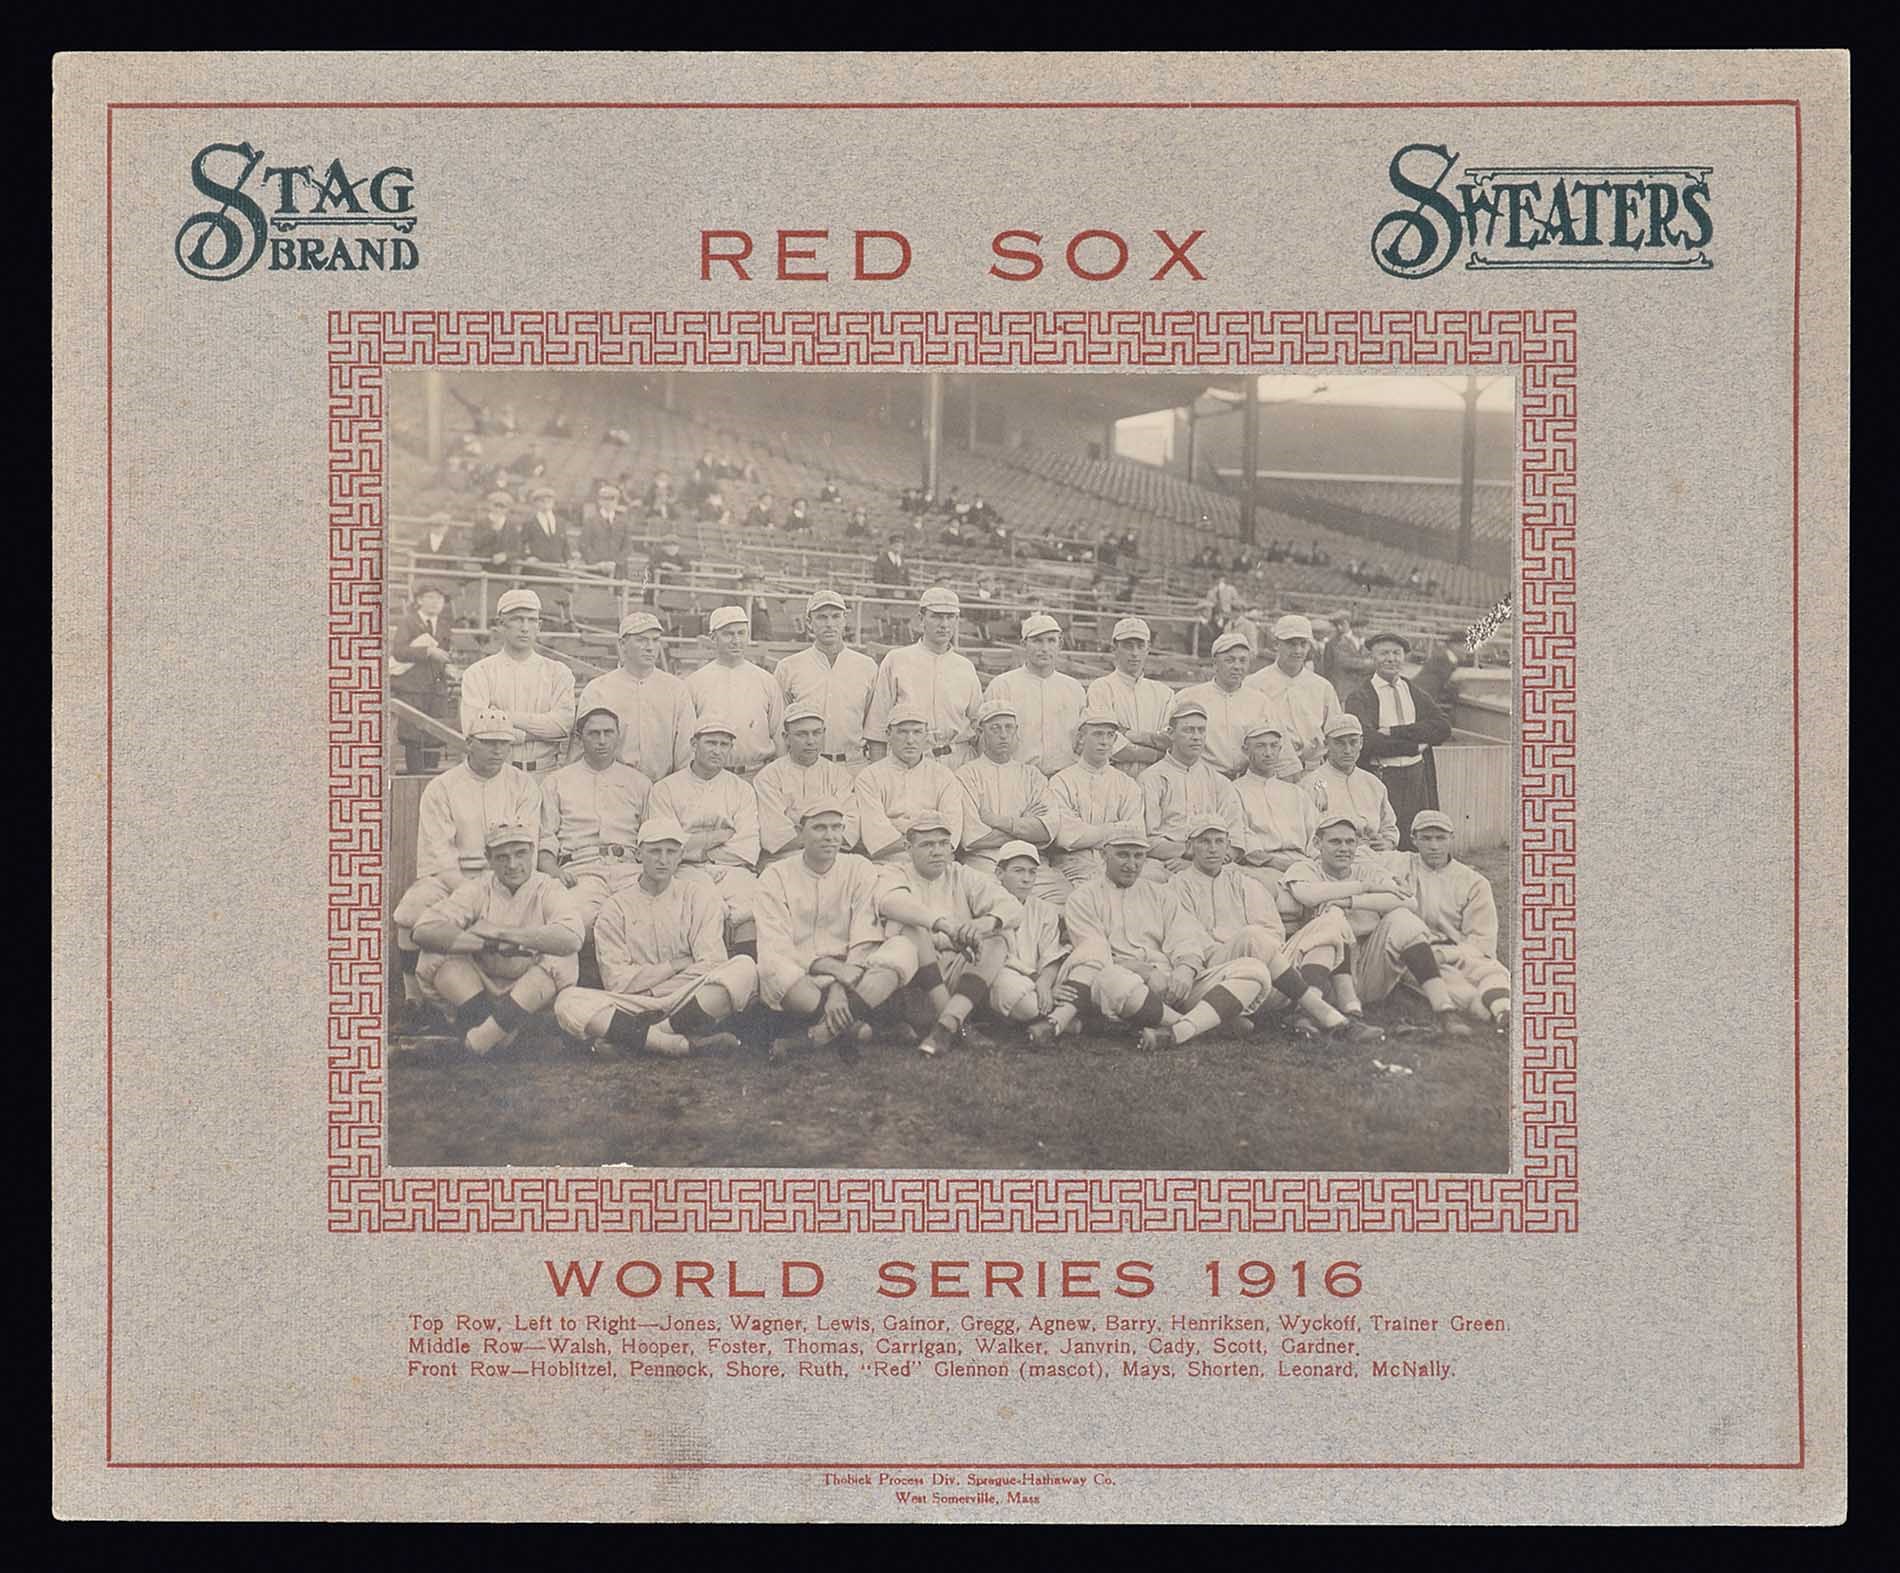 1916 Boston Red Sox Stag Brand Sweaters